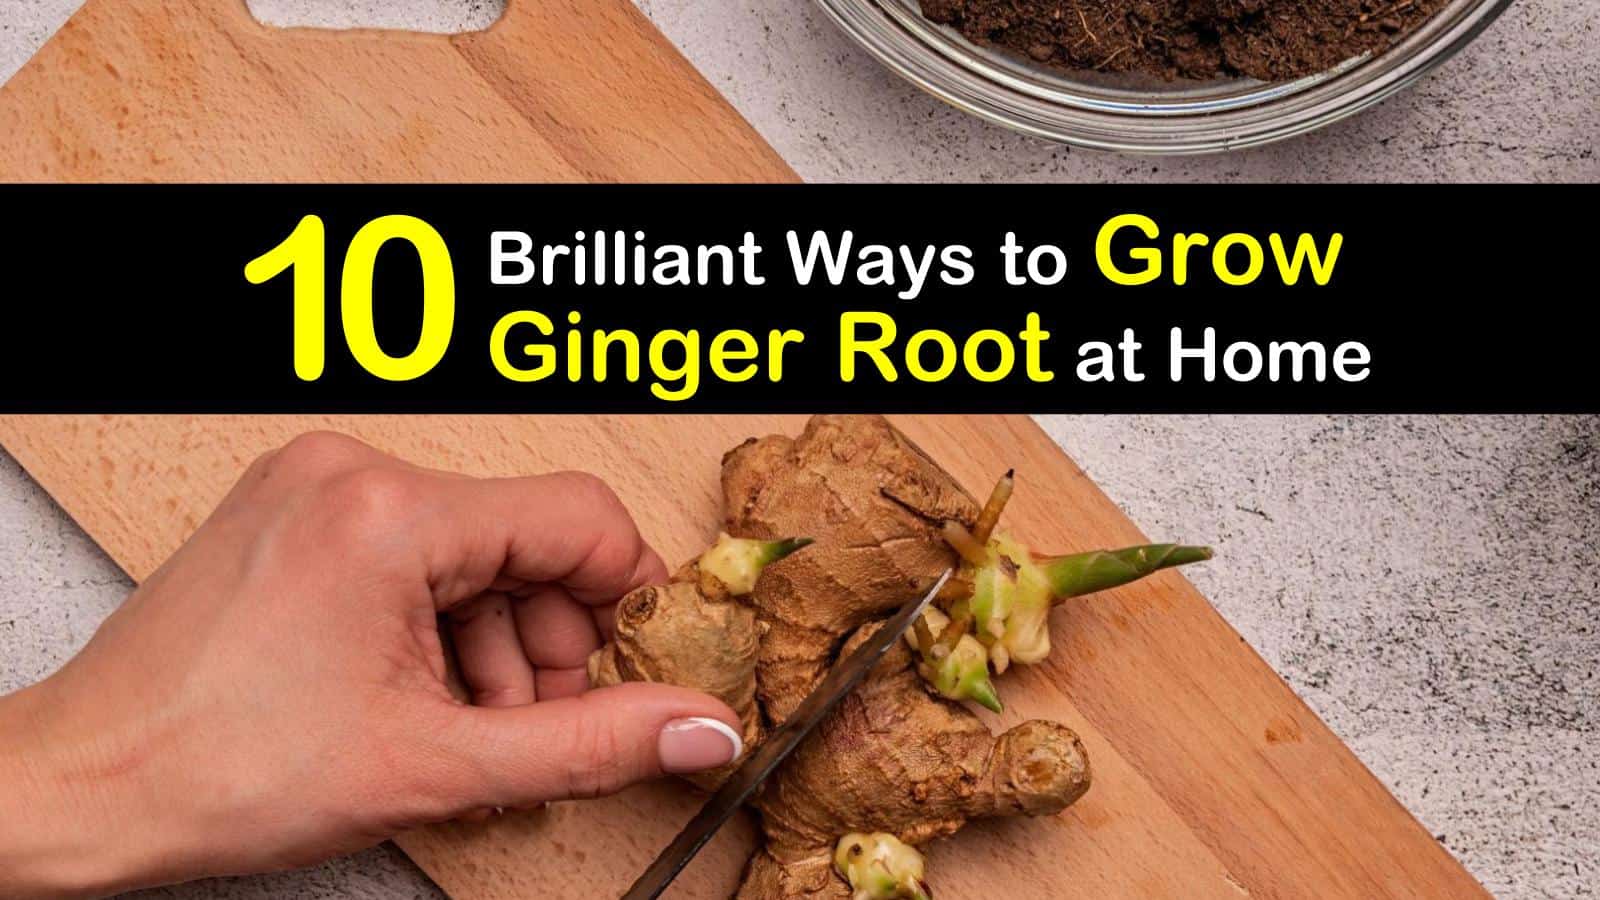 10 Brilliant Ways to Grow Ginger Root at Home